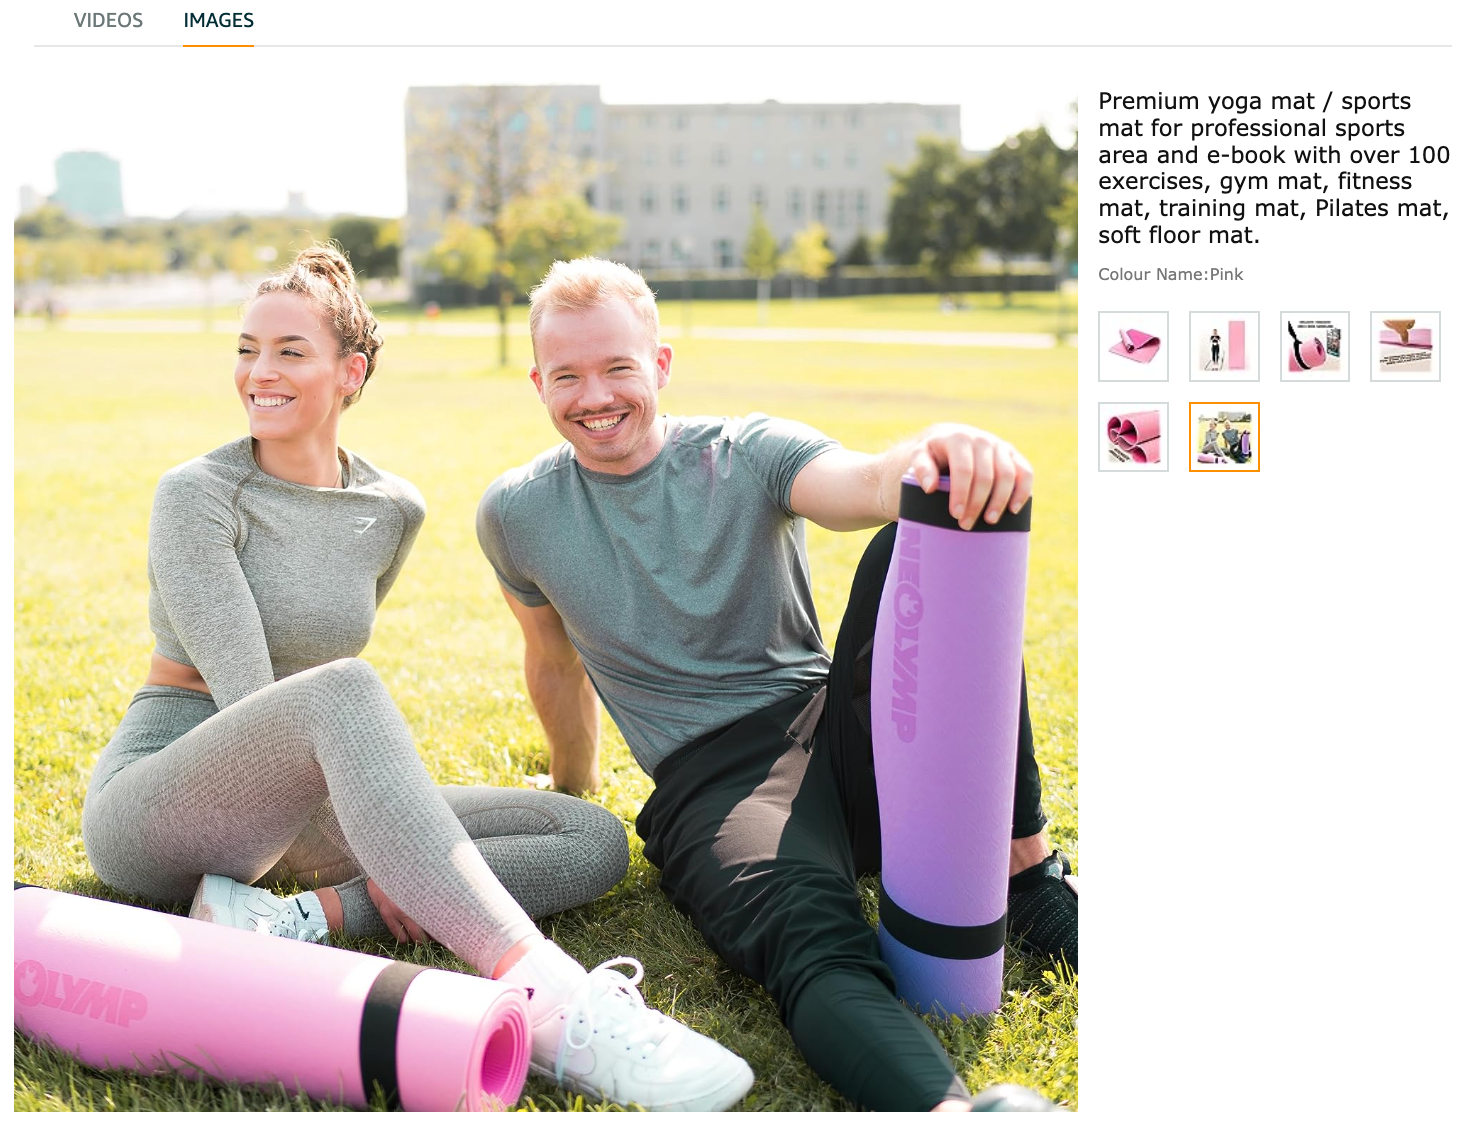 Figure 8: Alternative product image of a yoga mat, intended to convey a certain feeling and arouse emotions in potential customers